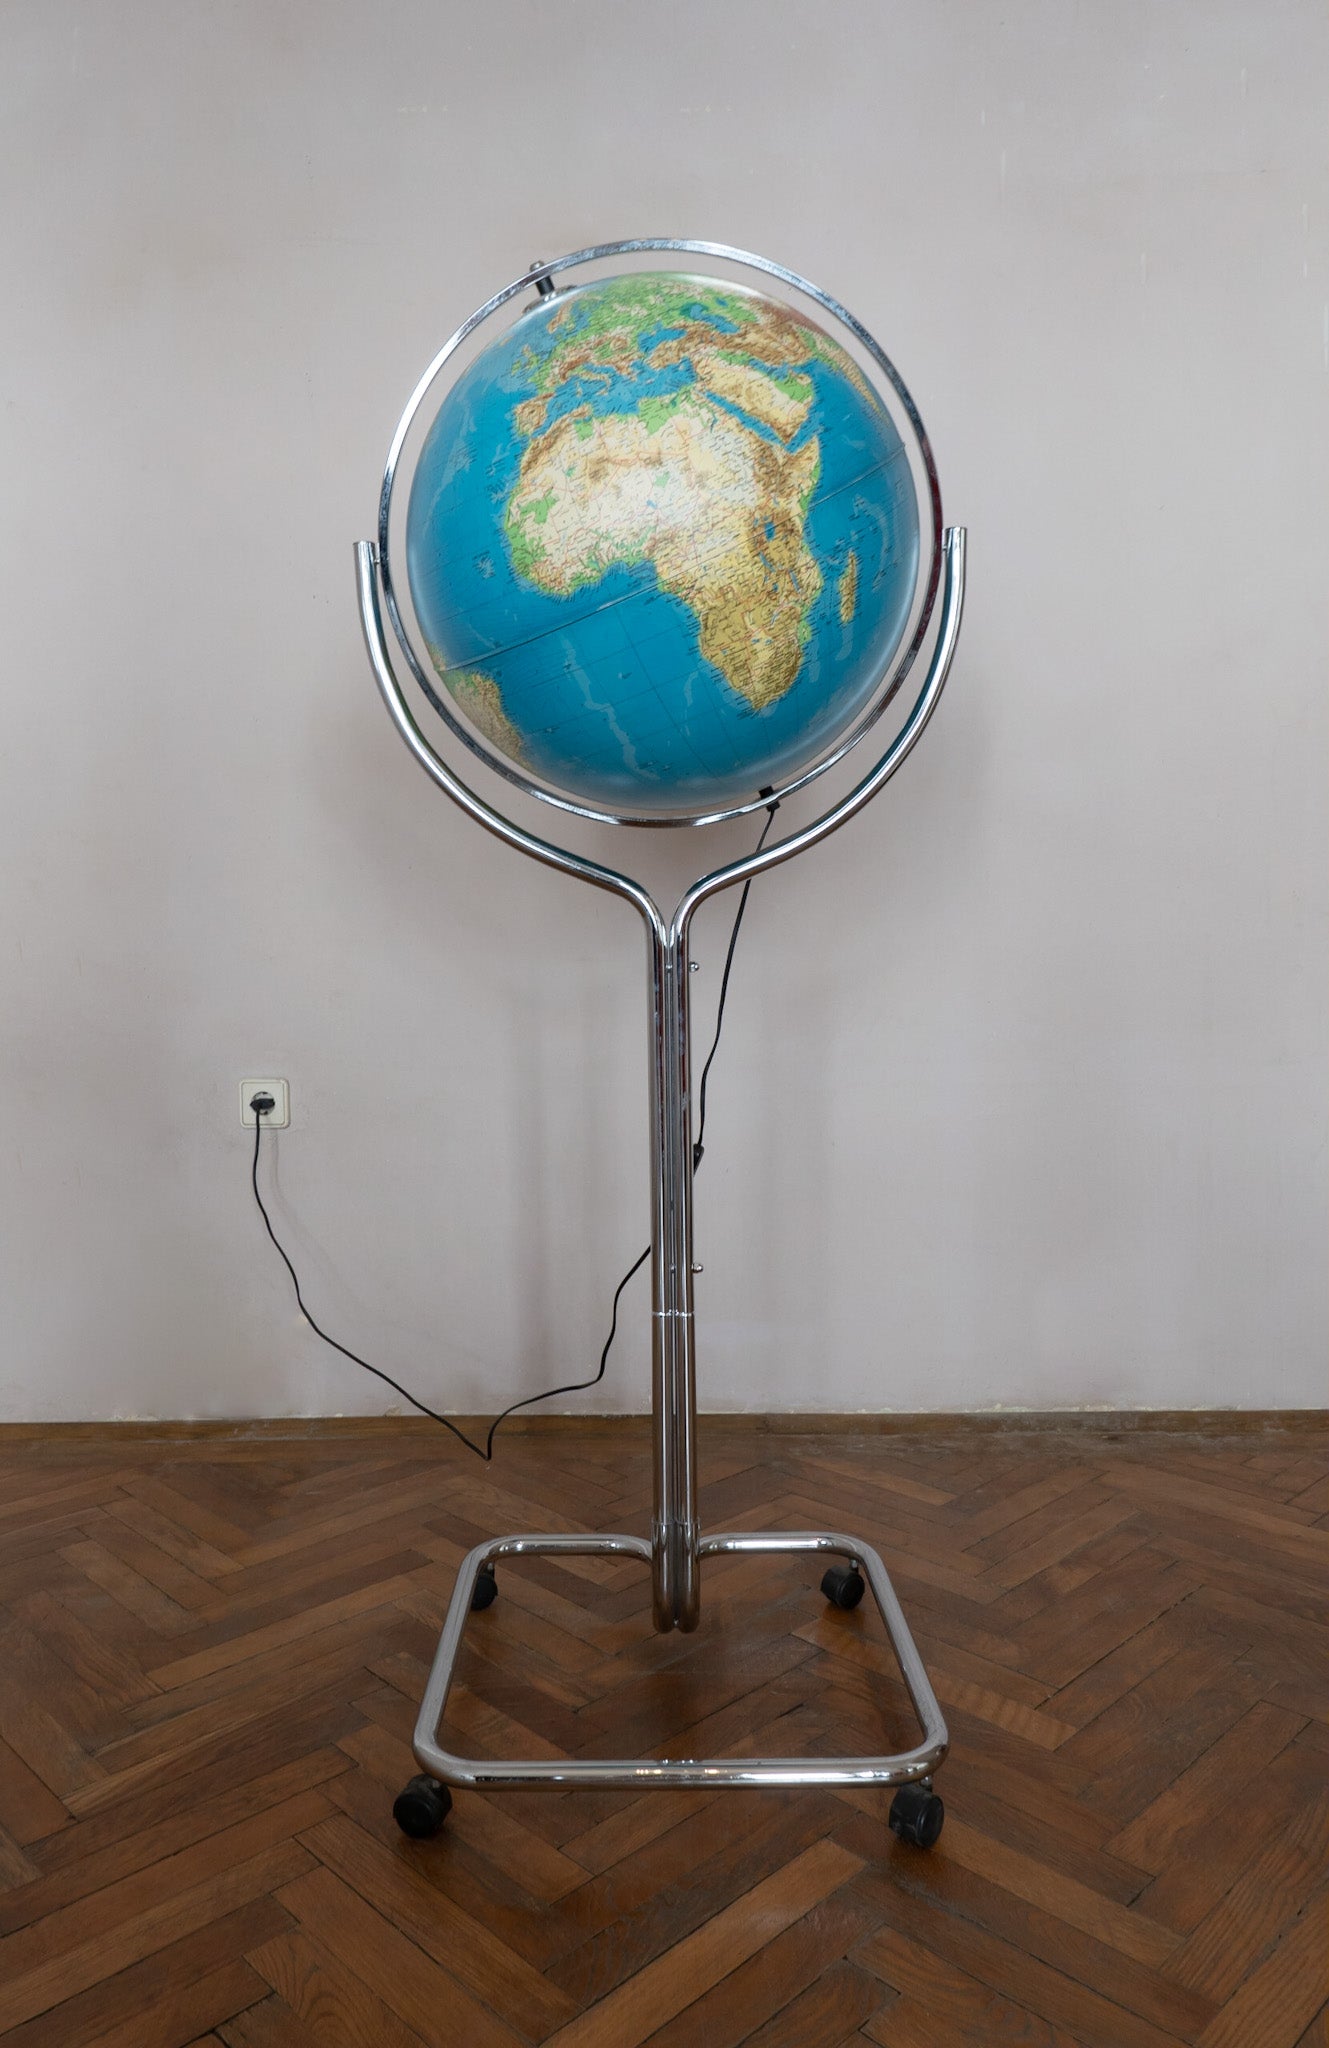 Mid-Century Modern Chrome Globe Floor Lamp, Italy 1970s.

Elevate your living space with a touch of retro-futuristic charm through this exceptional Italian floor lamp with a large globe that functions as a lamp. The standout feature of this lamp is